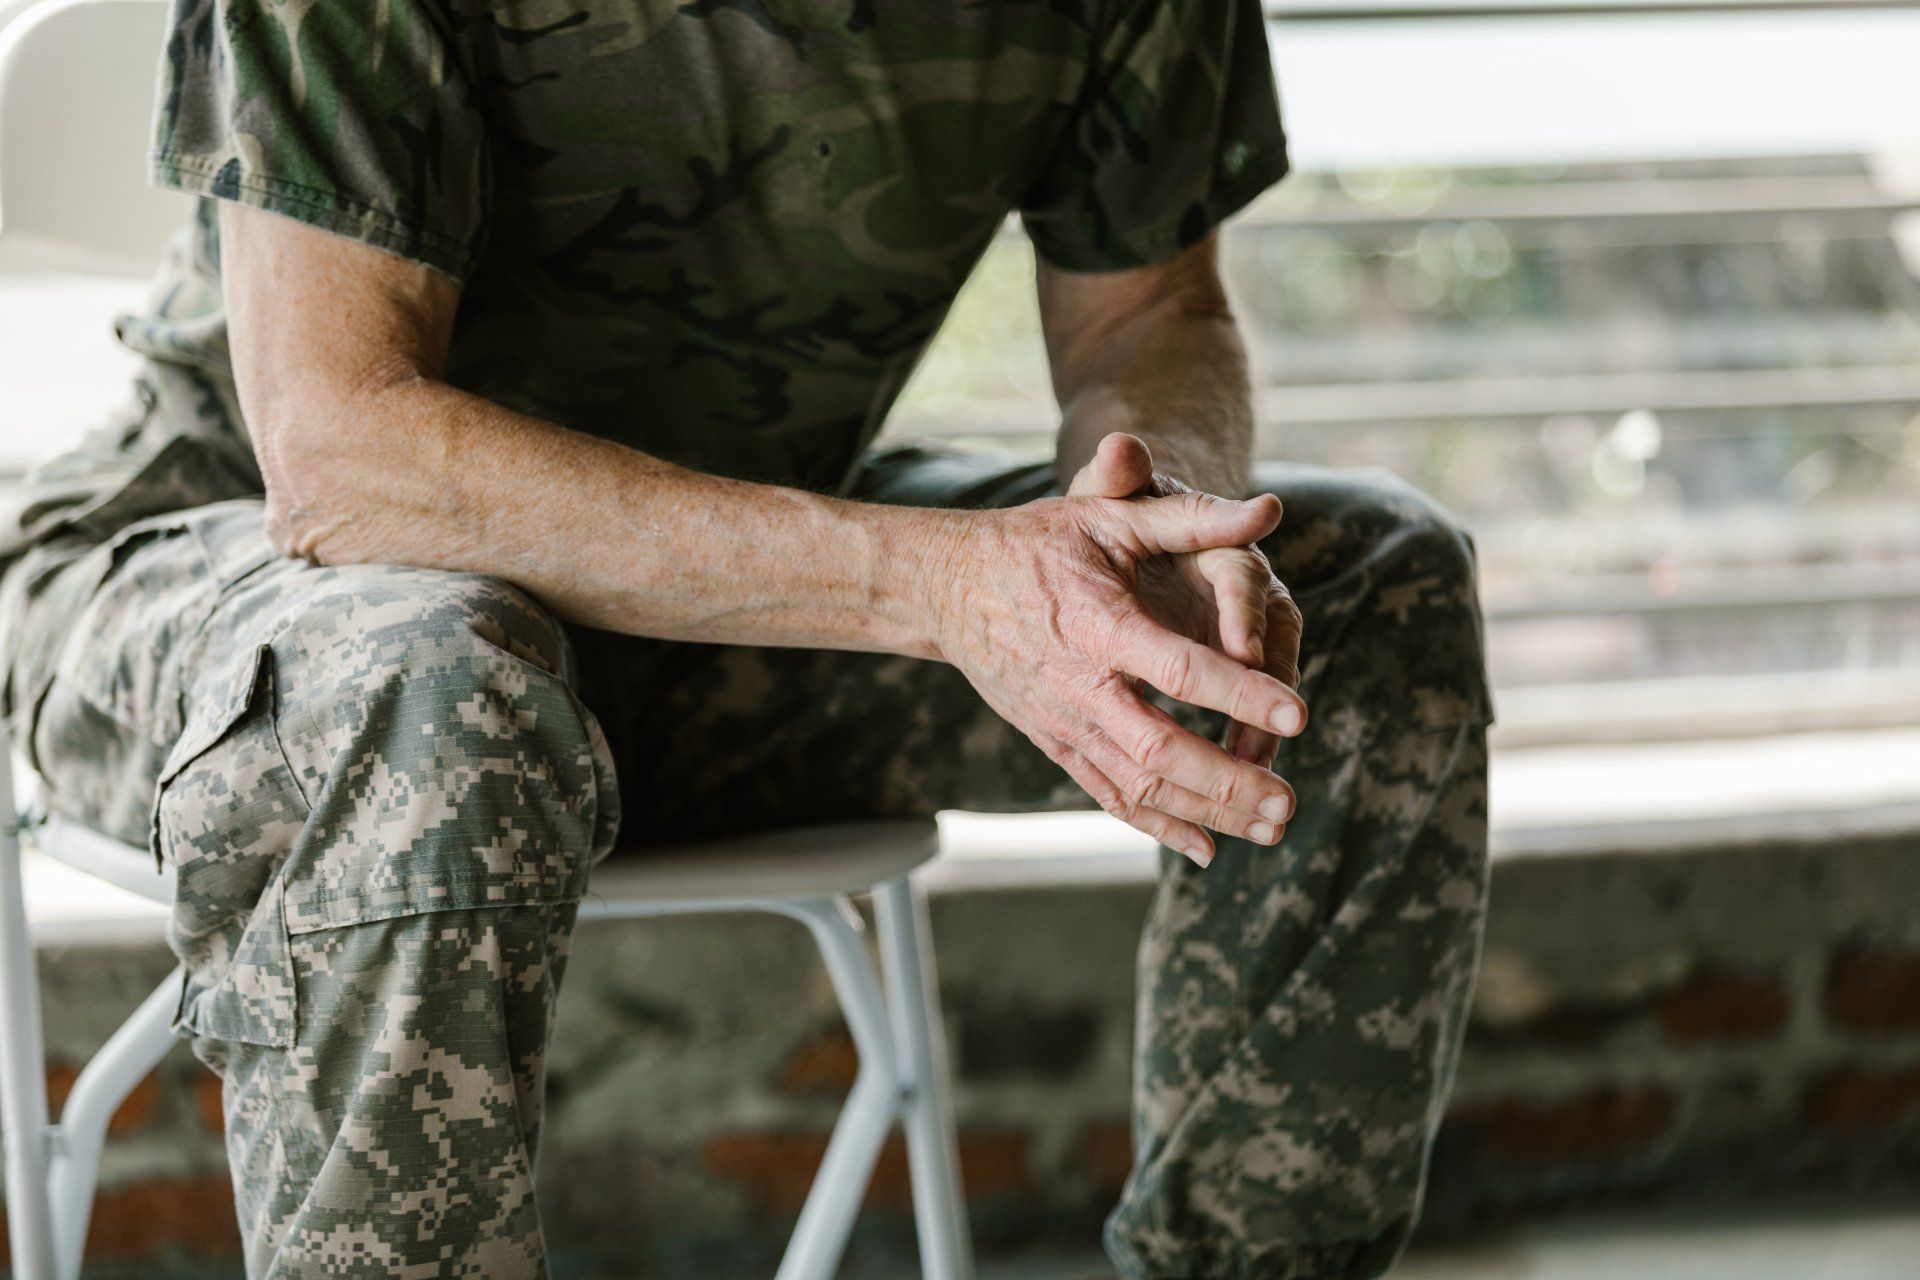 Sitting man in army fatigues leaning forward with elbows on legs